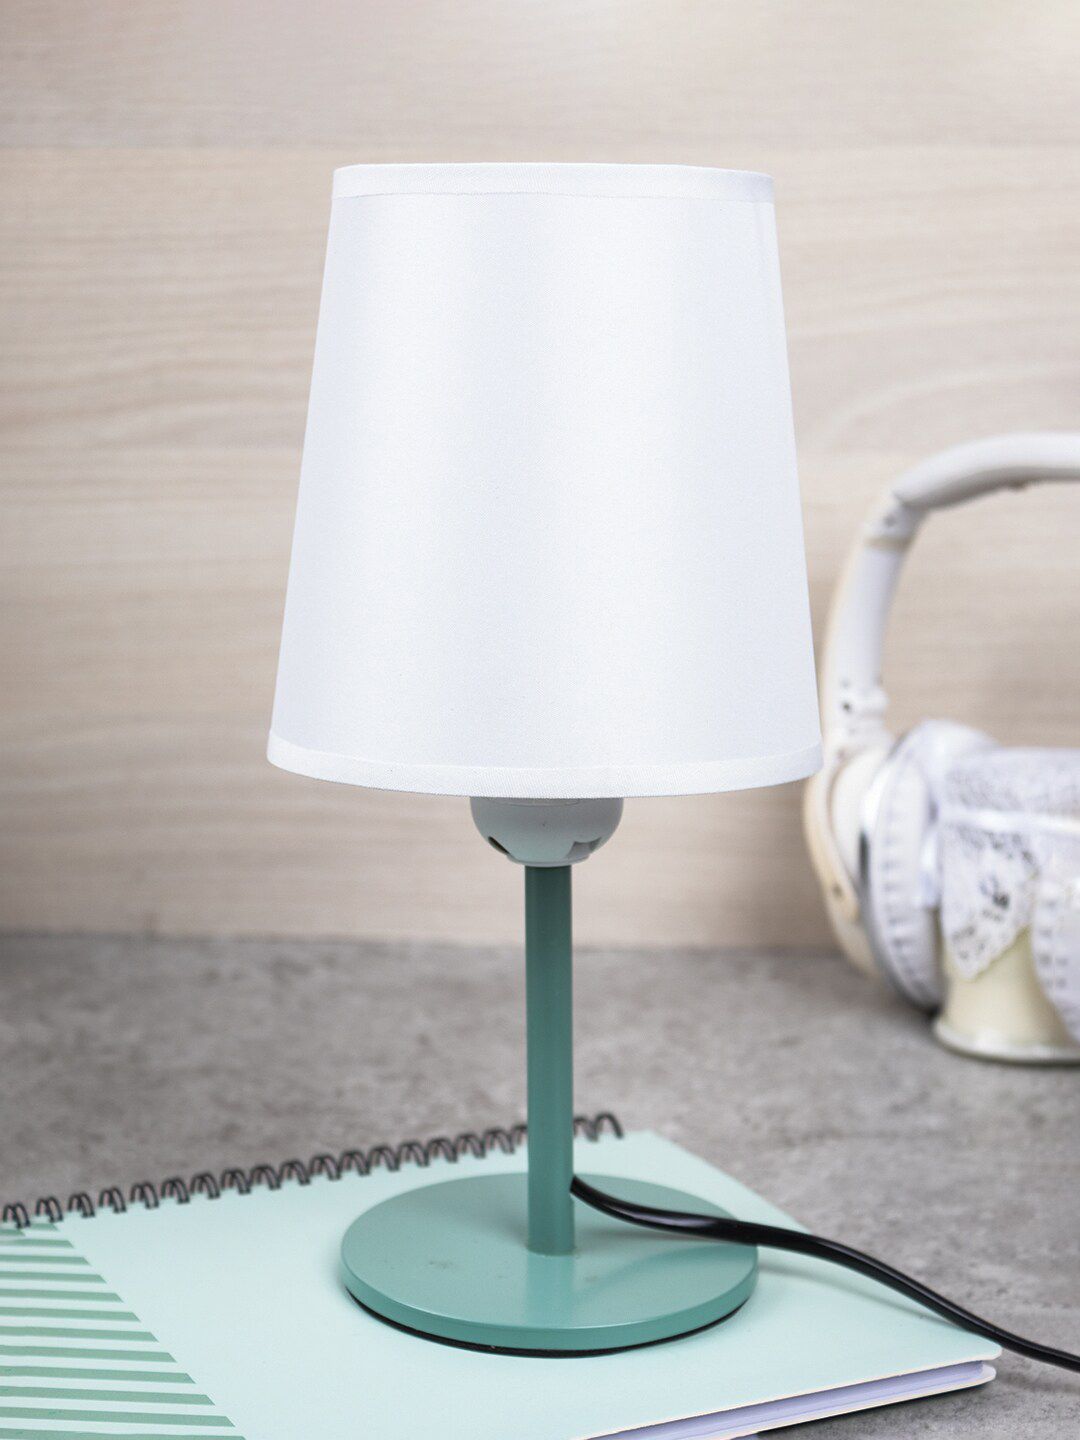 MARKET99 Green & White Solid Contemporary Table Lamp with Shade Price in India